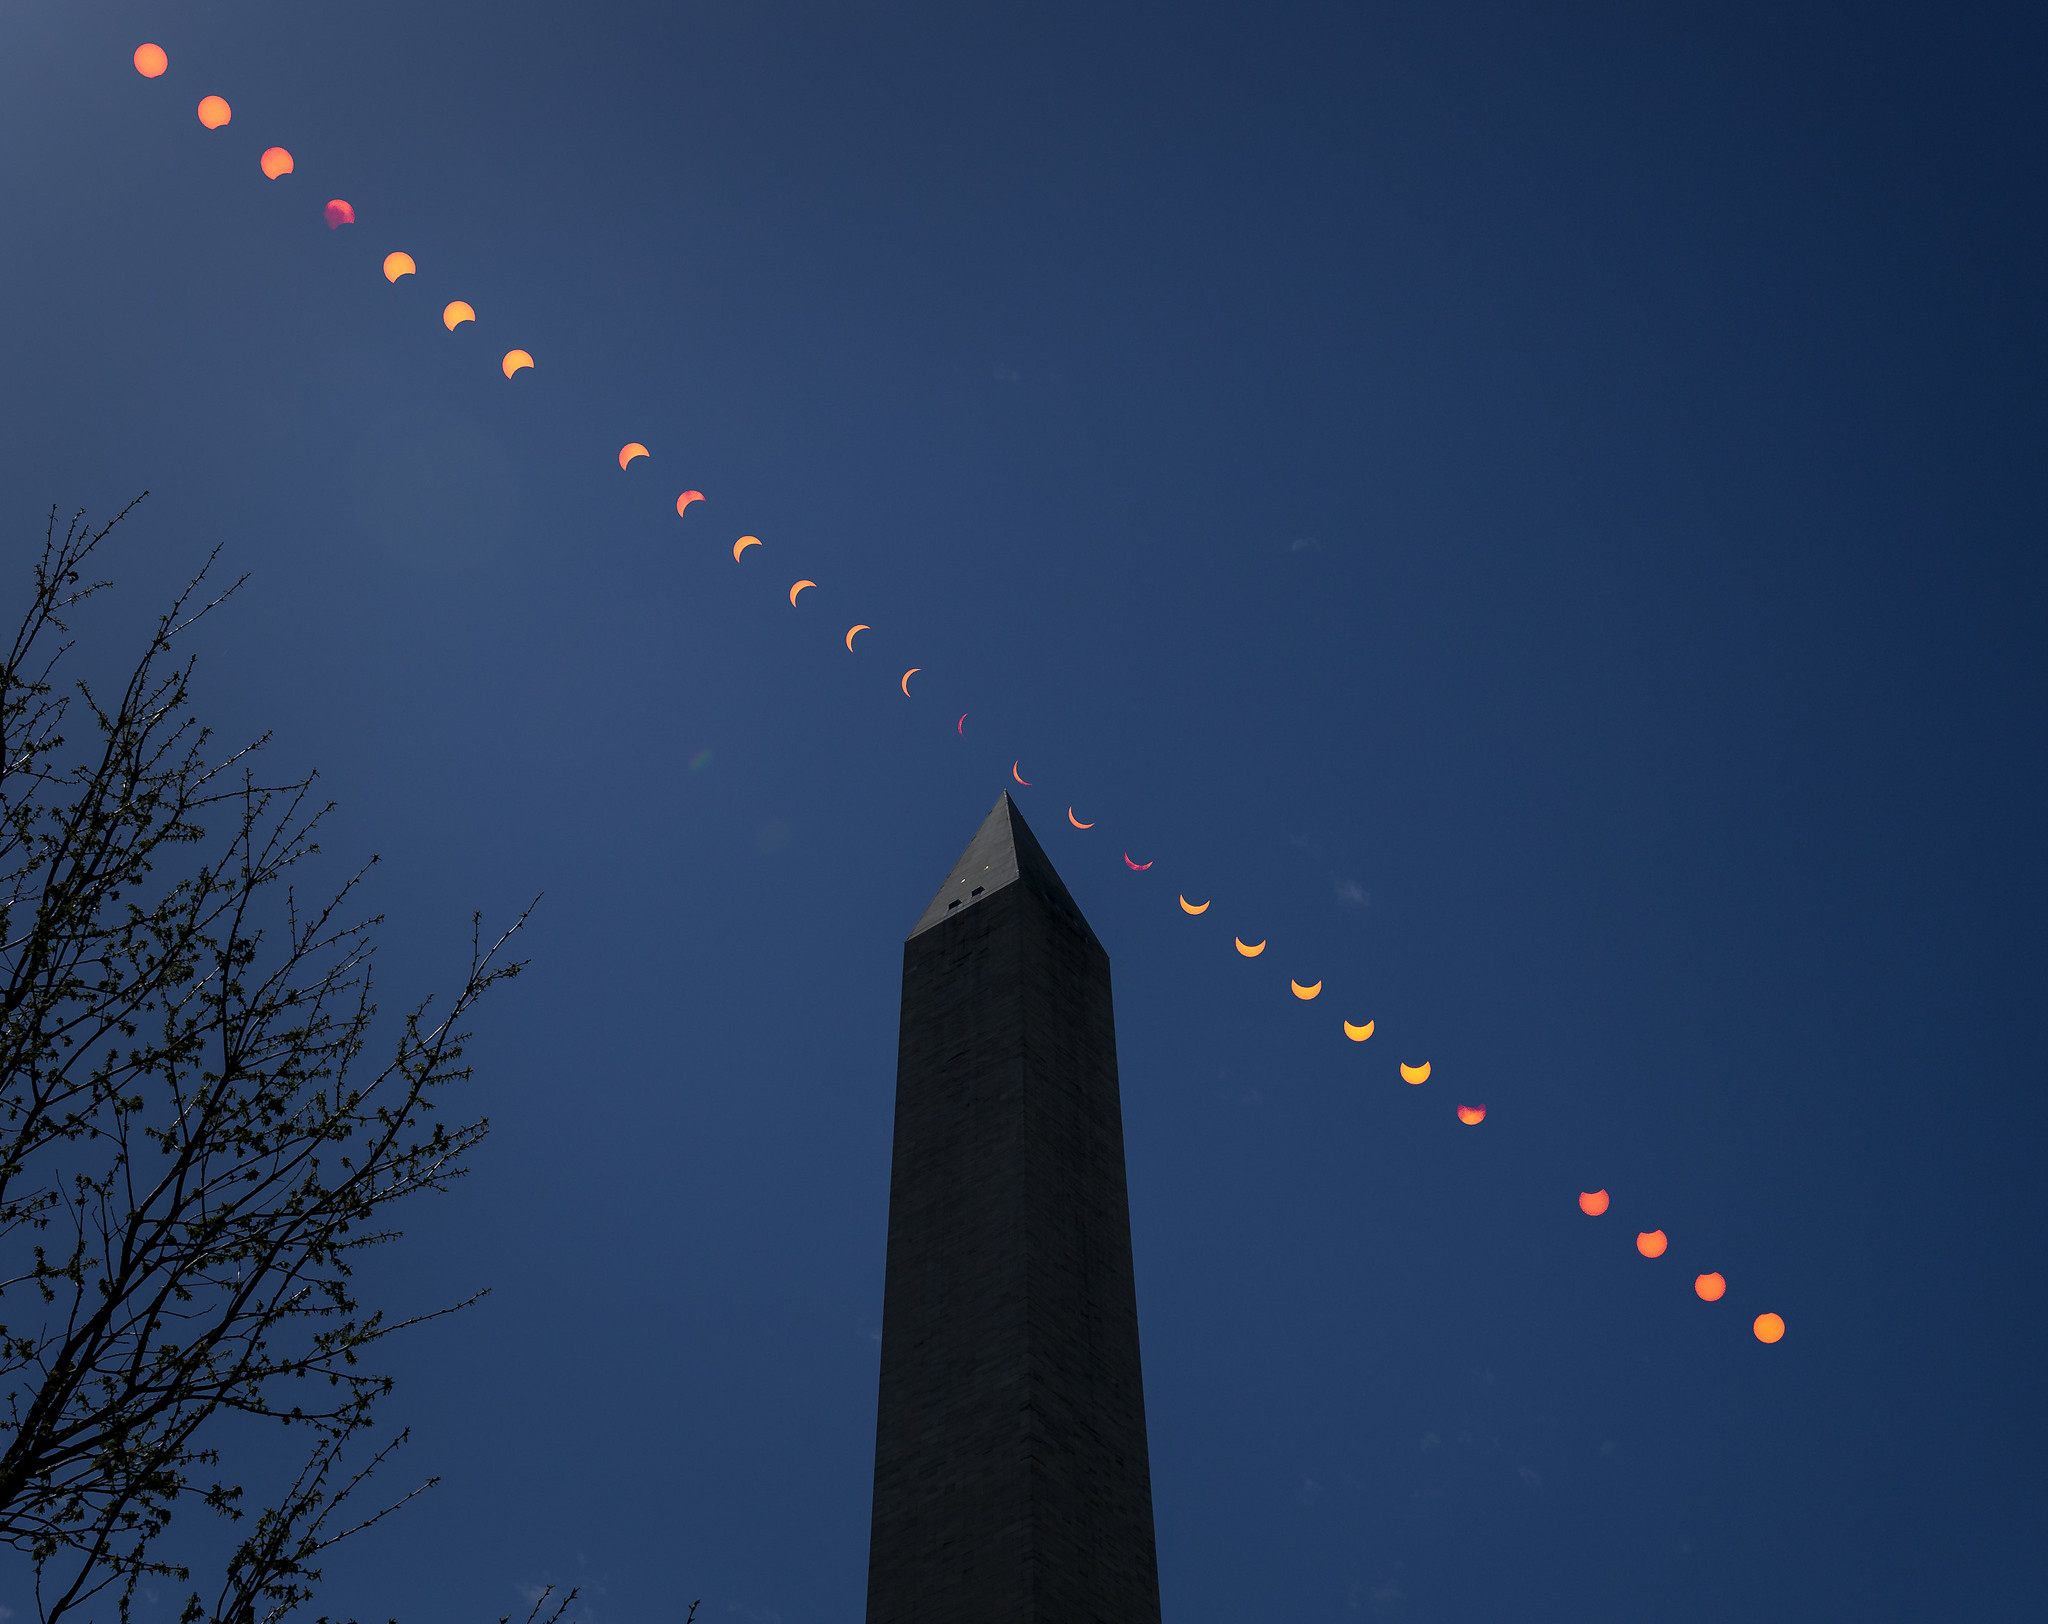 Composite image of the April 8 partial eclipse as seen over the Washington Monument